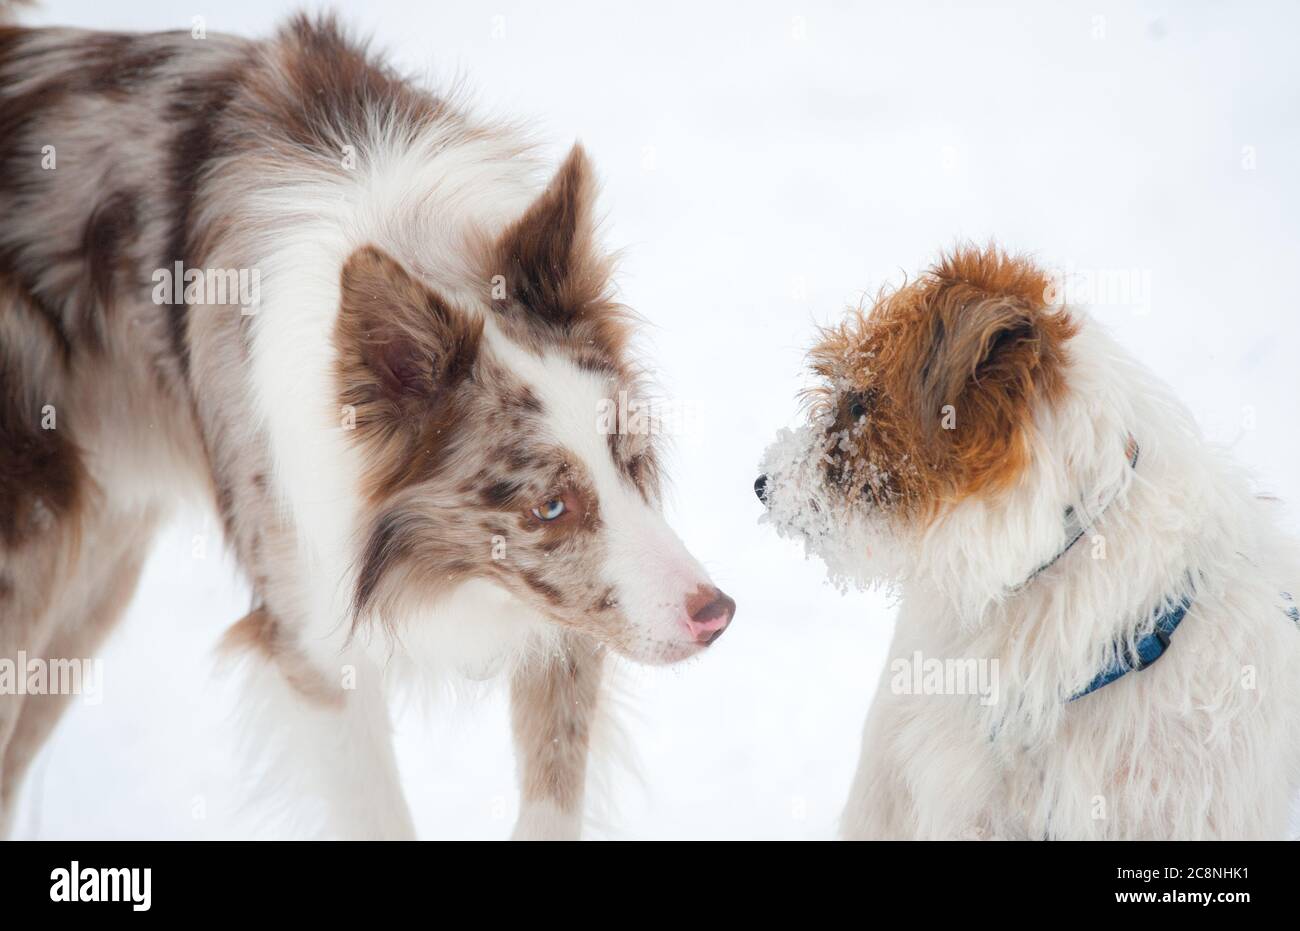 Cute border collie meets jack russel terrier in snowy park Stock Photo